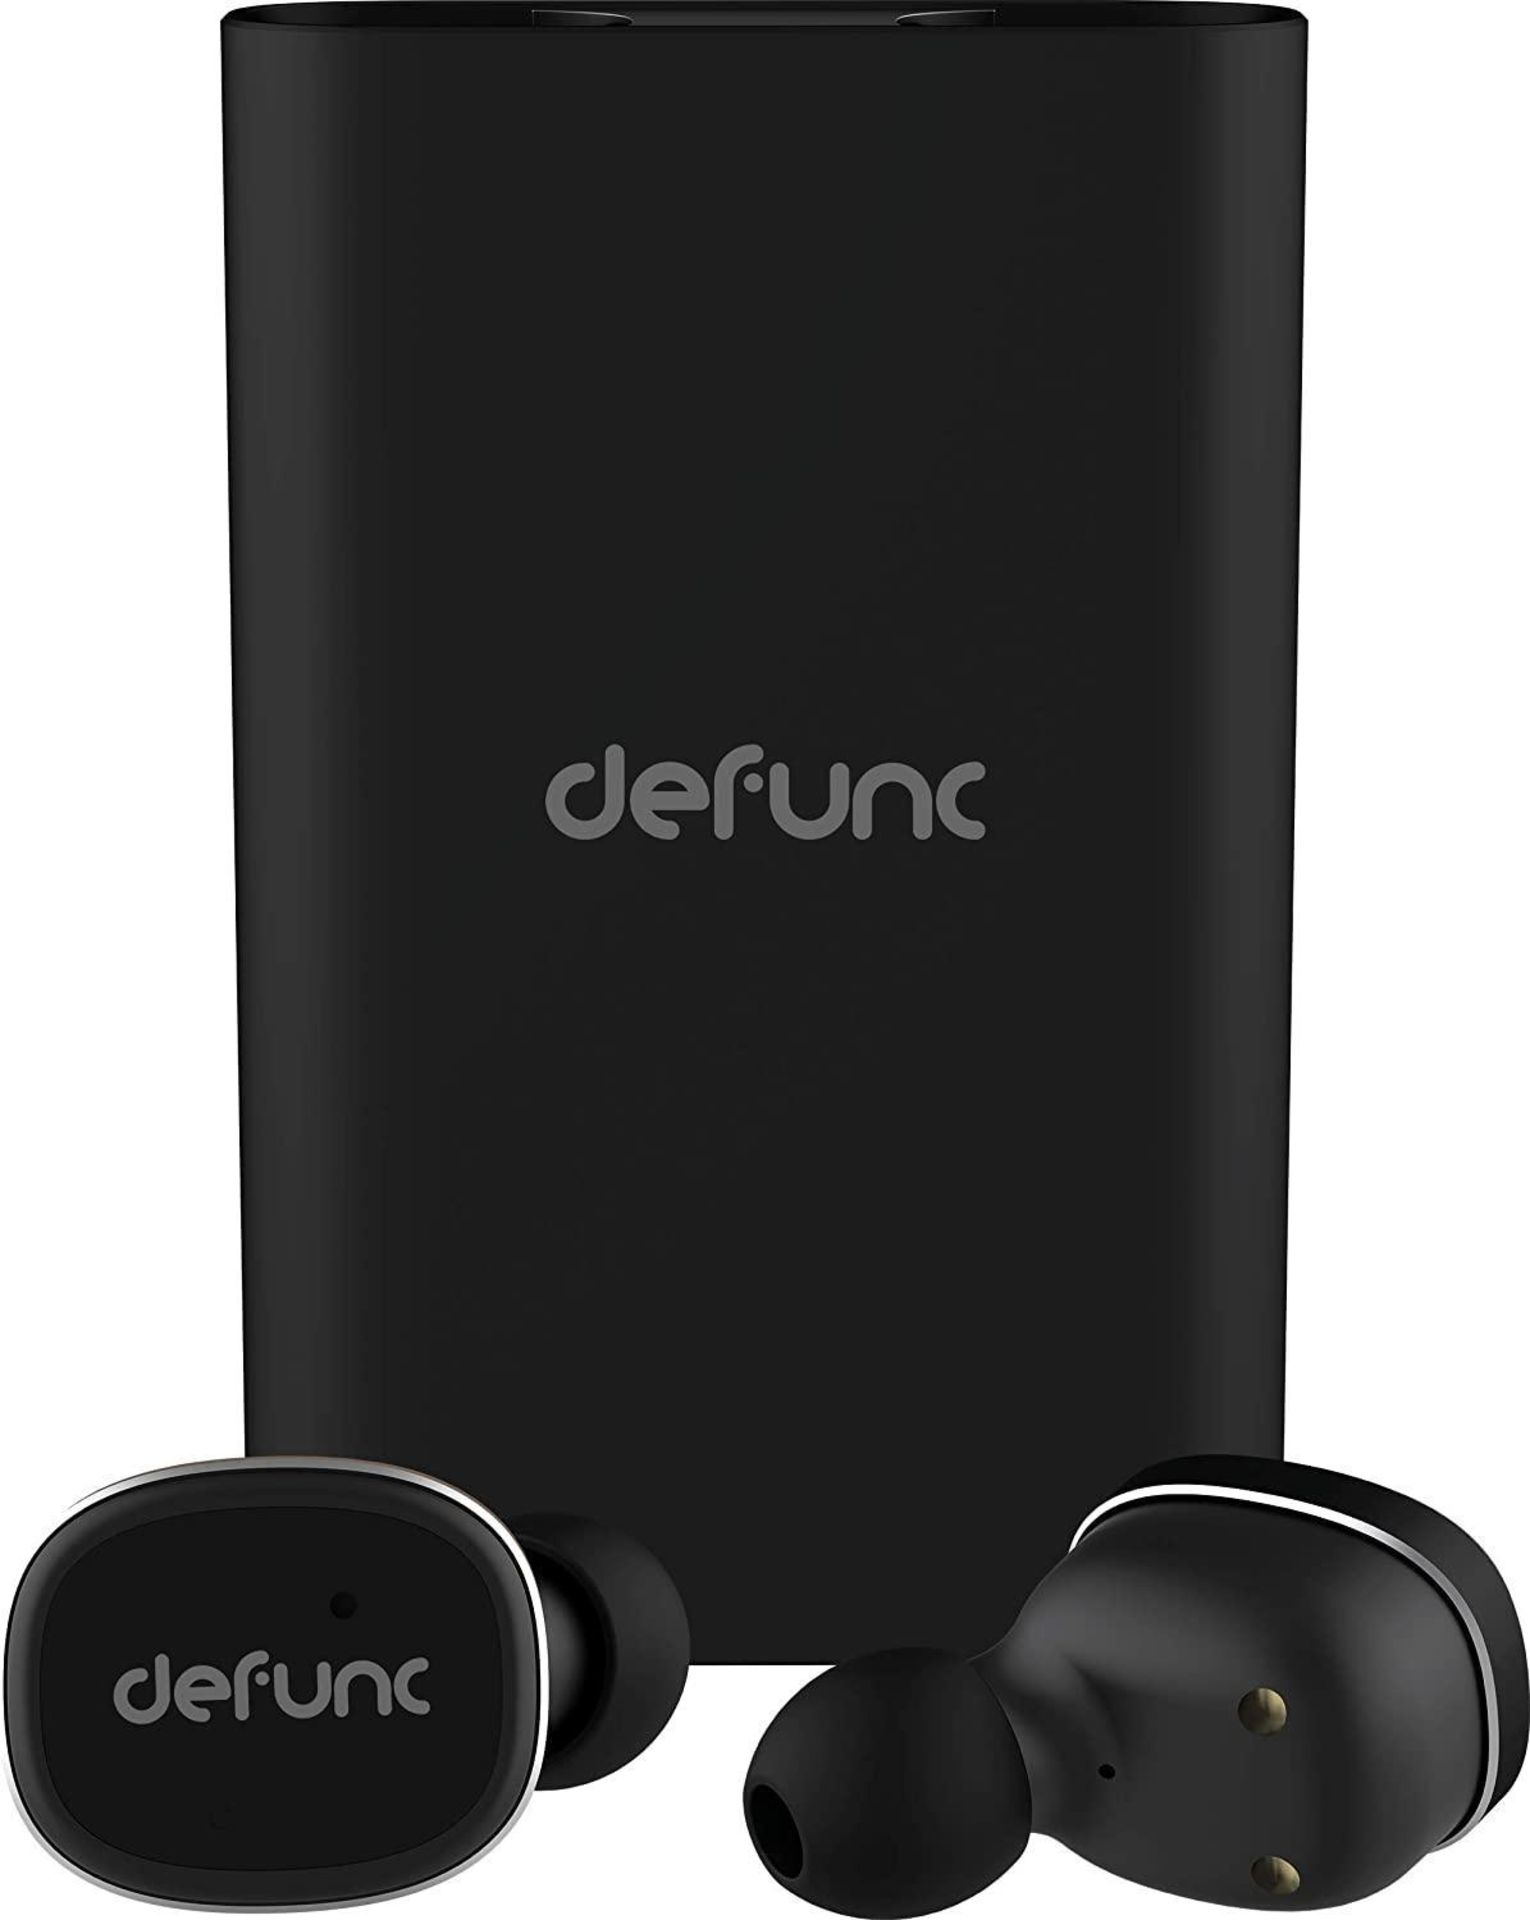 Defunc True Wireless Bluetooth Headphones with 60 Hours Playtime/Talk time $68.87 RRP